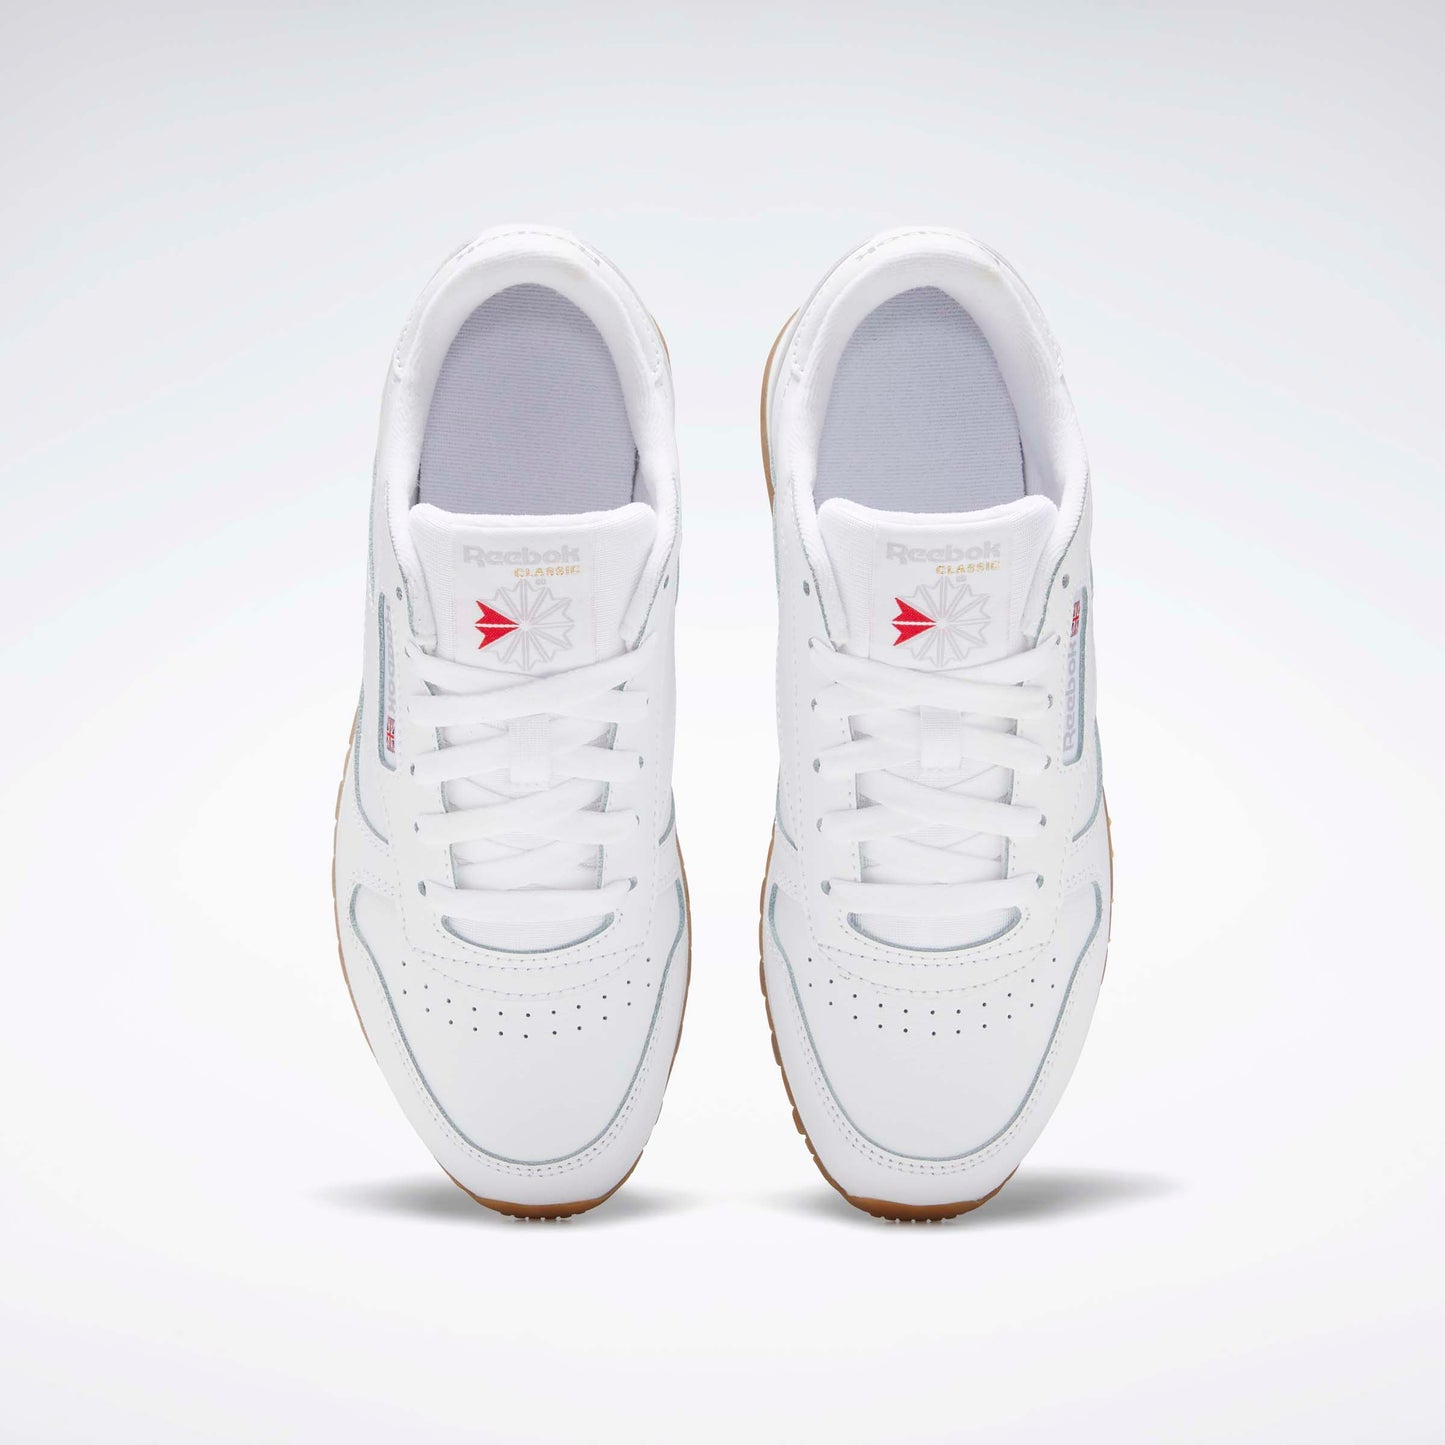 Classic Leather Shoes - Big Kids White/White